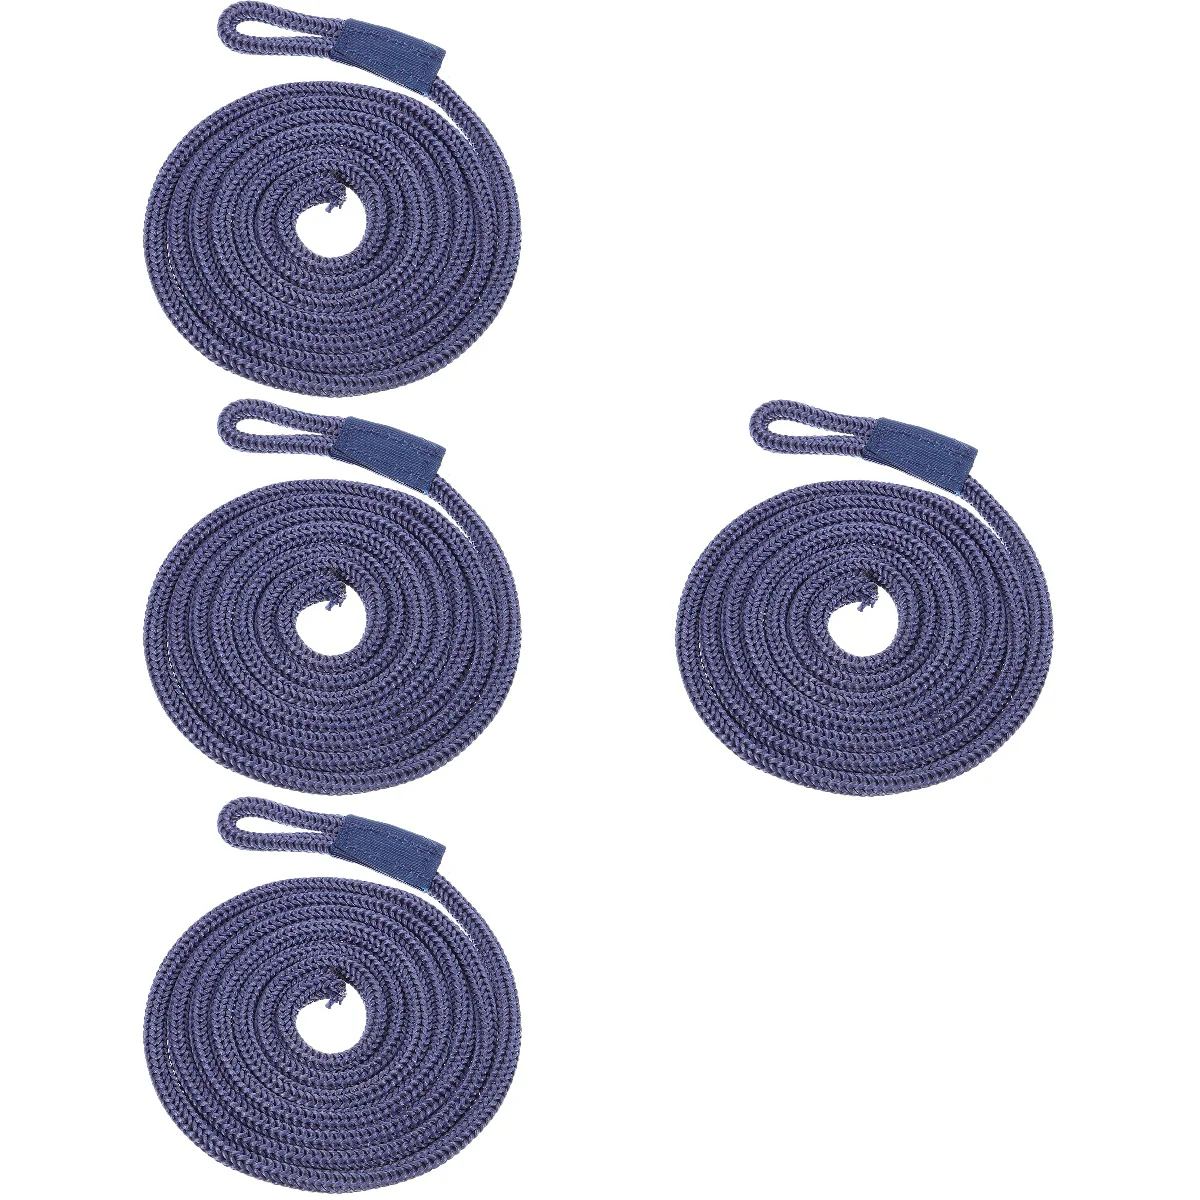 

4 Pack Boat Accessories Marine Buoys Pp 146x2cm Line Fenders Blue Yacht Supplies Rope